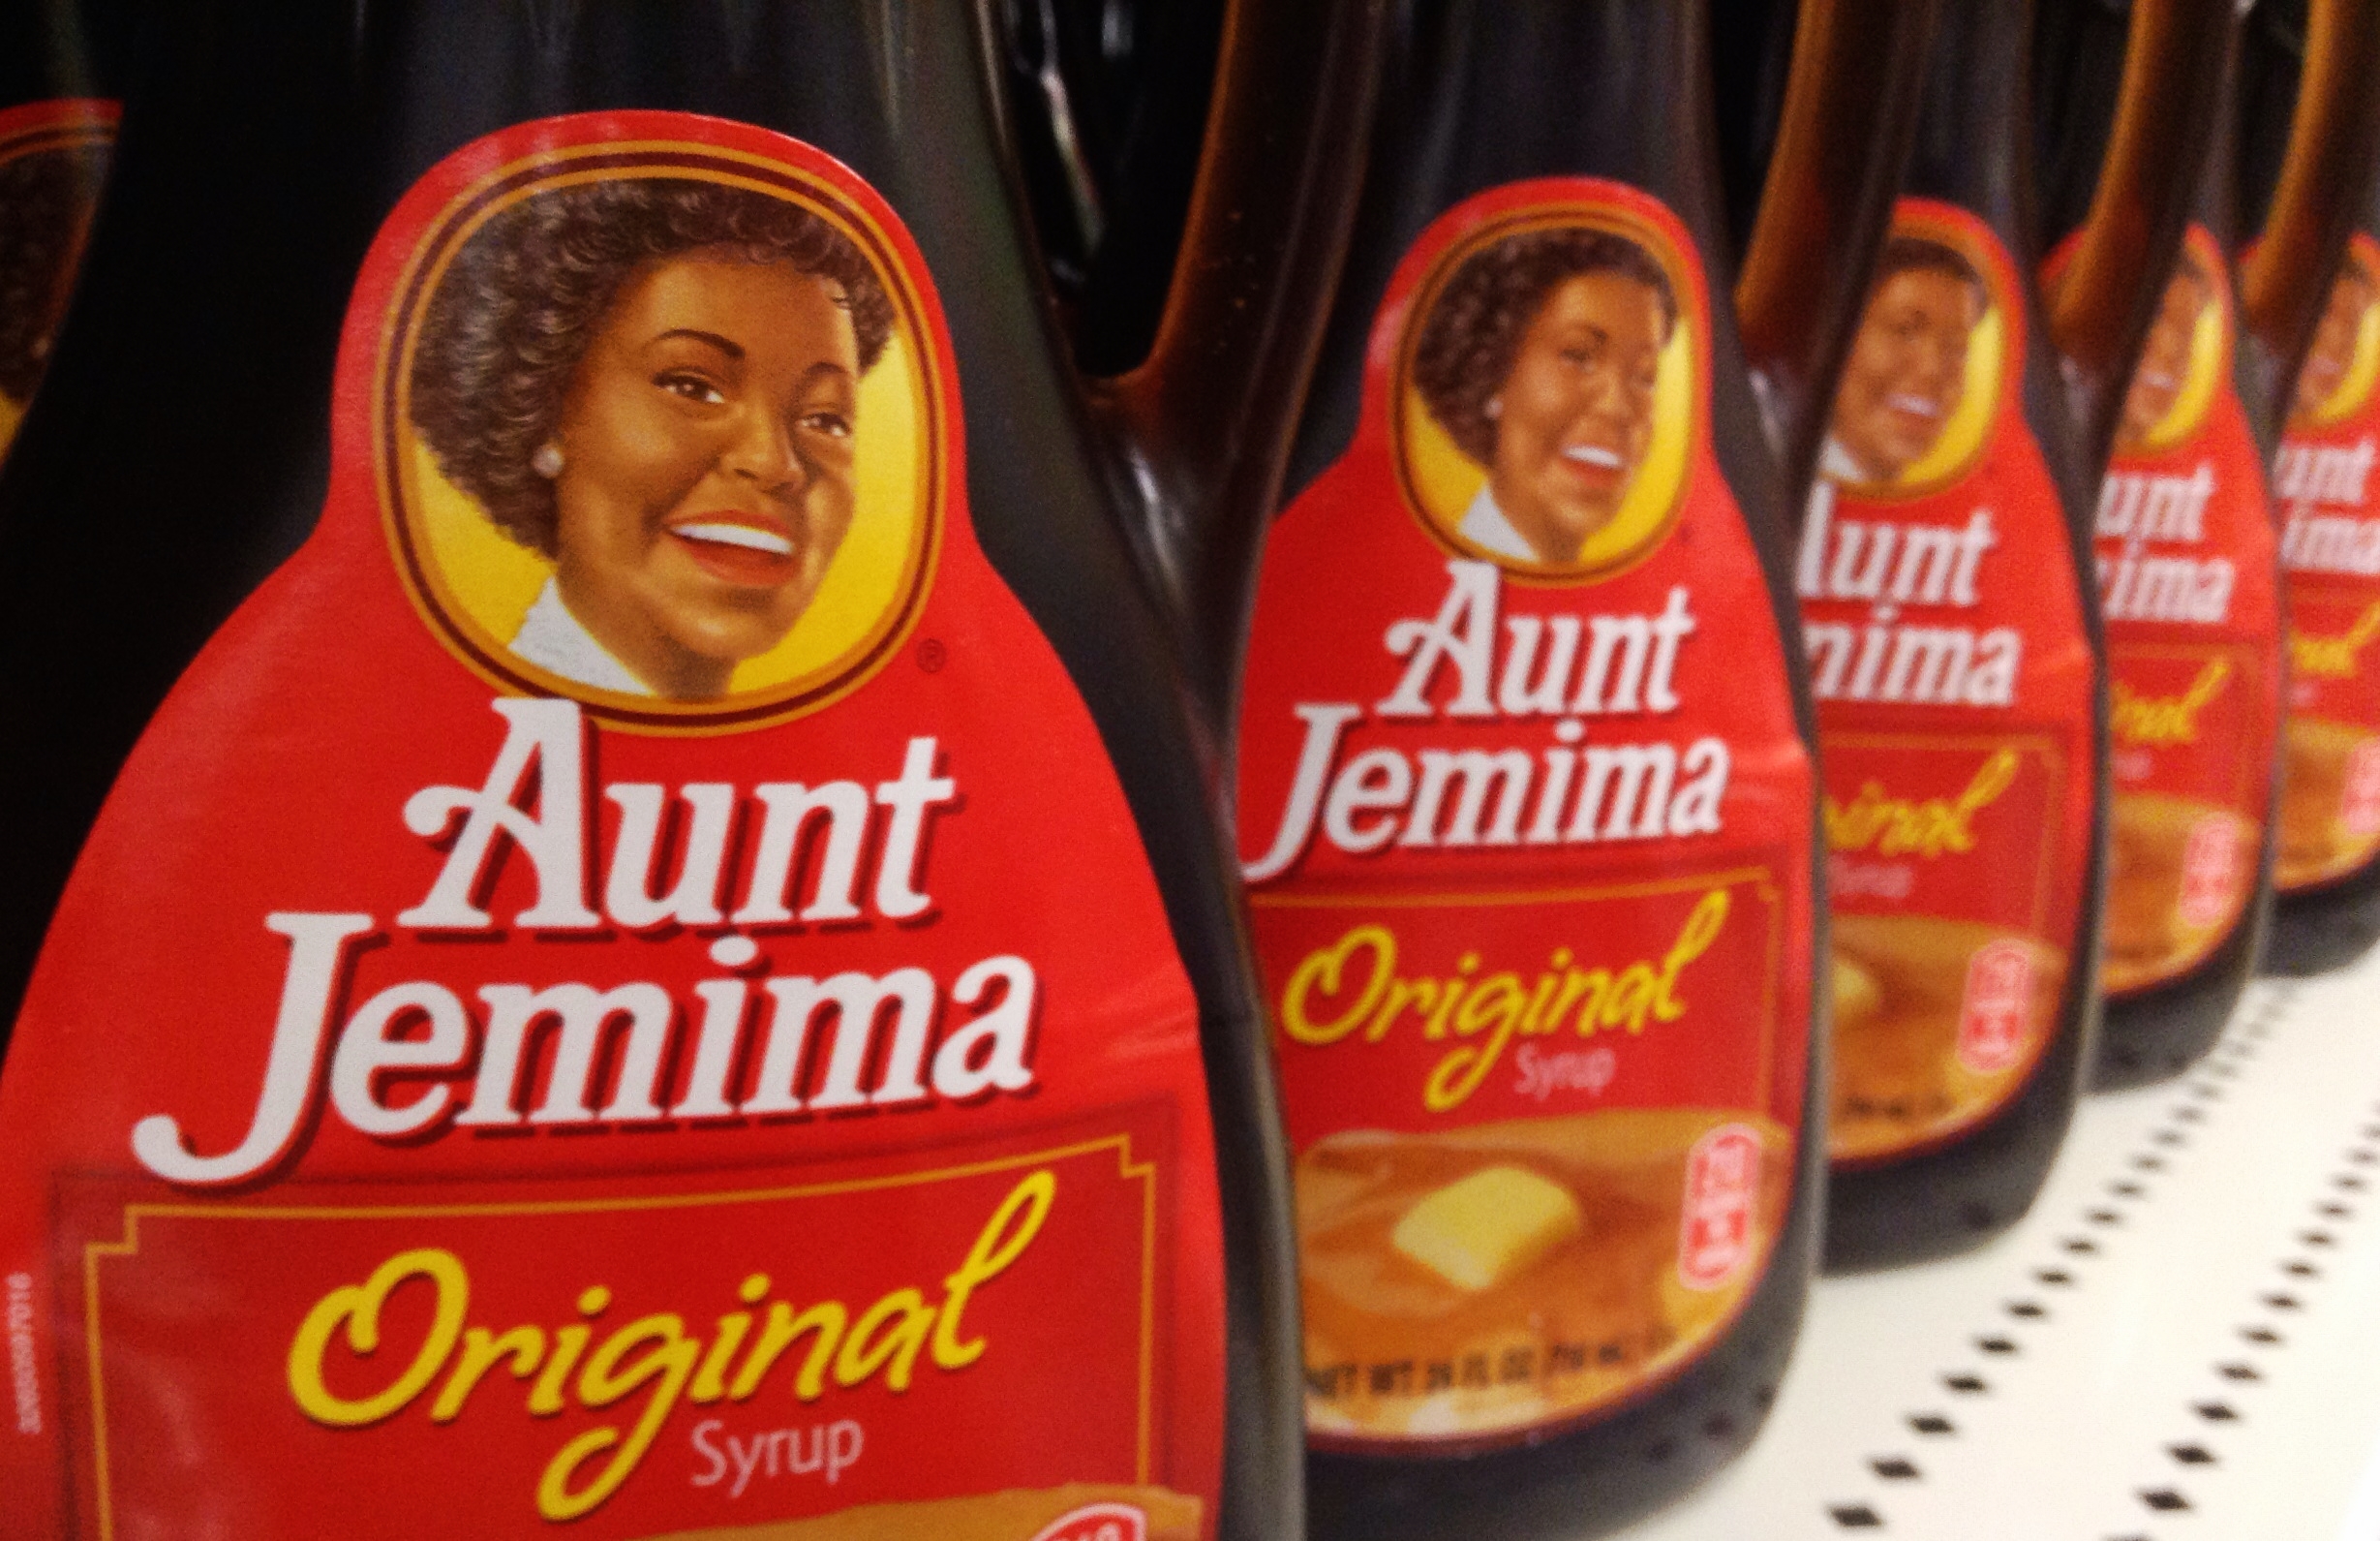 Quaker Oats is retiring the more than 130-year-old Aunt Jemima brand and logo, acknowledging its origins are based on a racial stereotype.